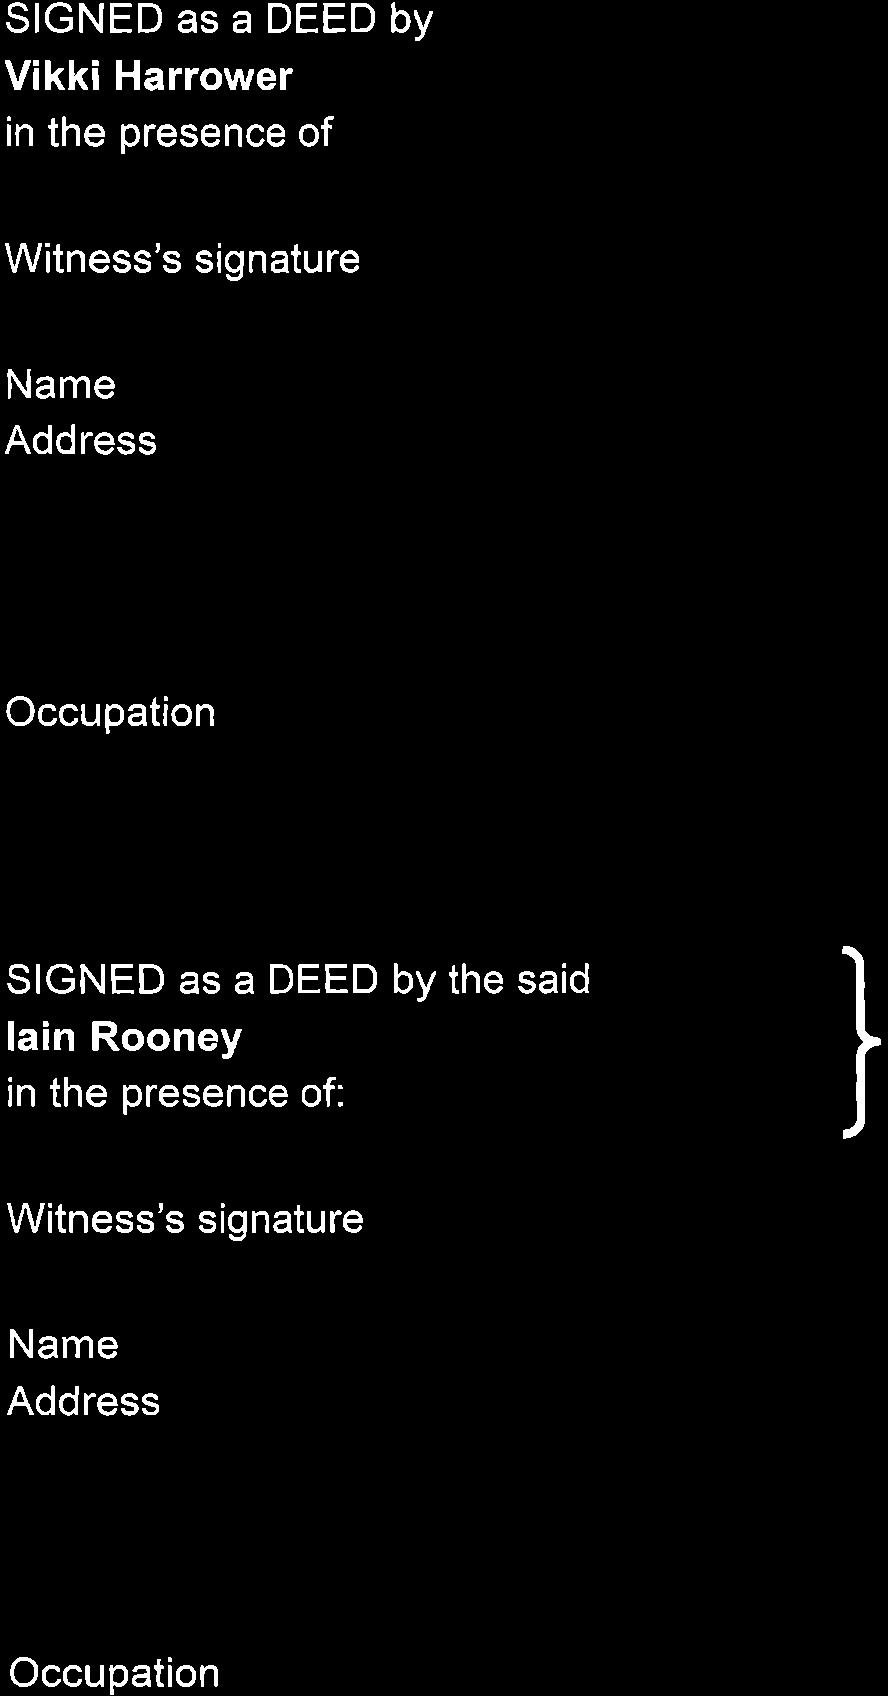 SIGNED as a DEED by the said Vikki Harrower in the presence of: }ffi~ Witness's signature Name Address